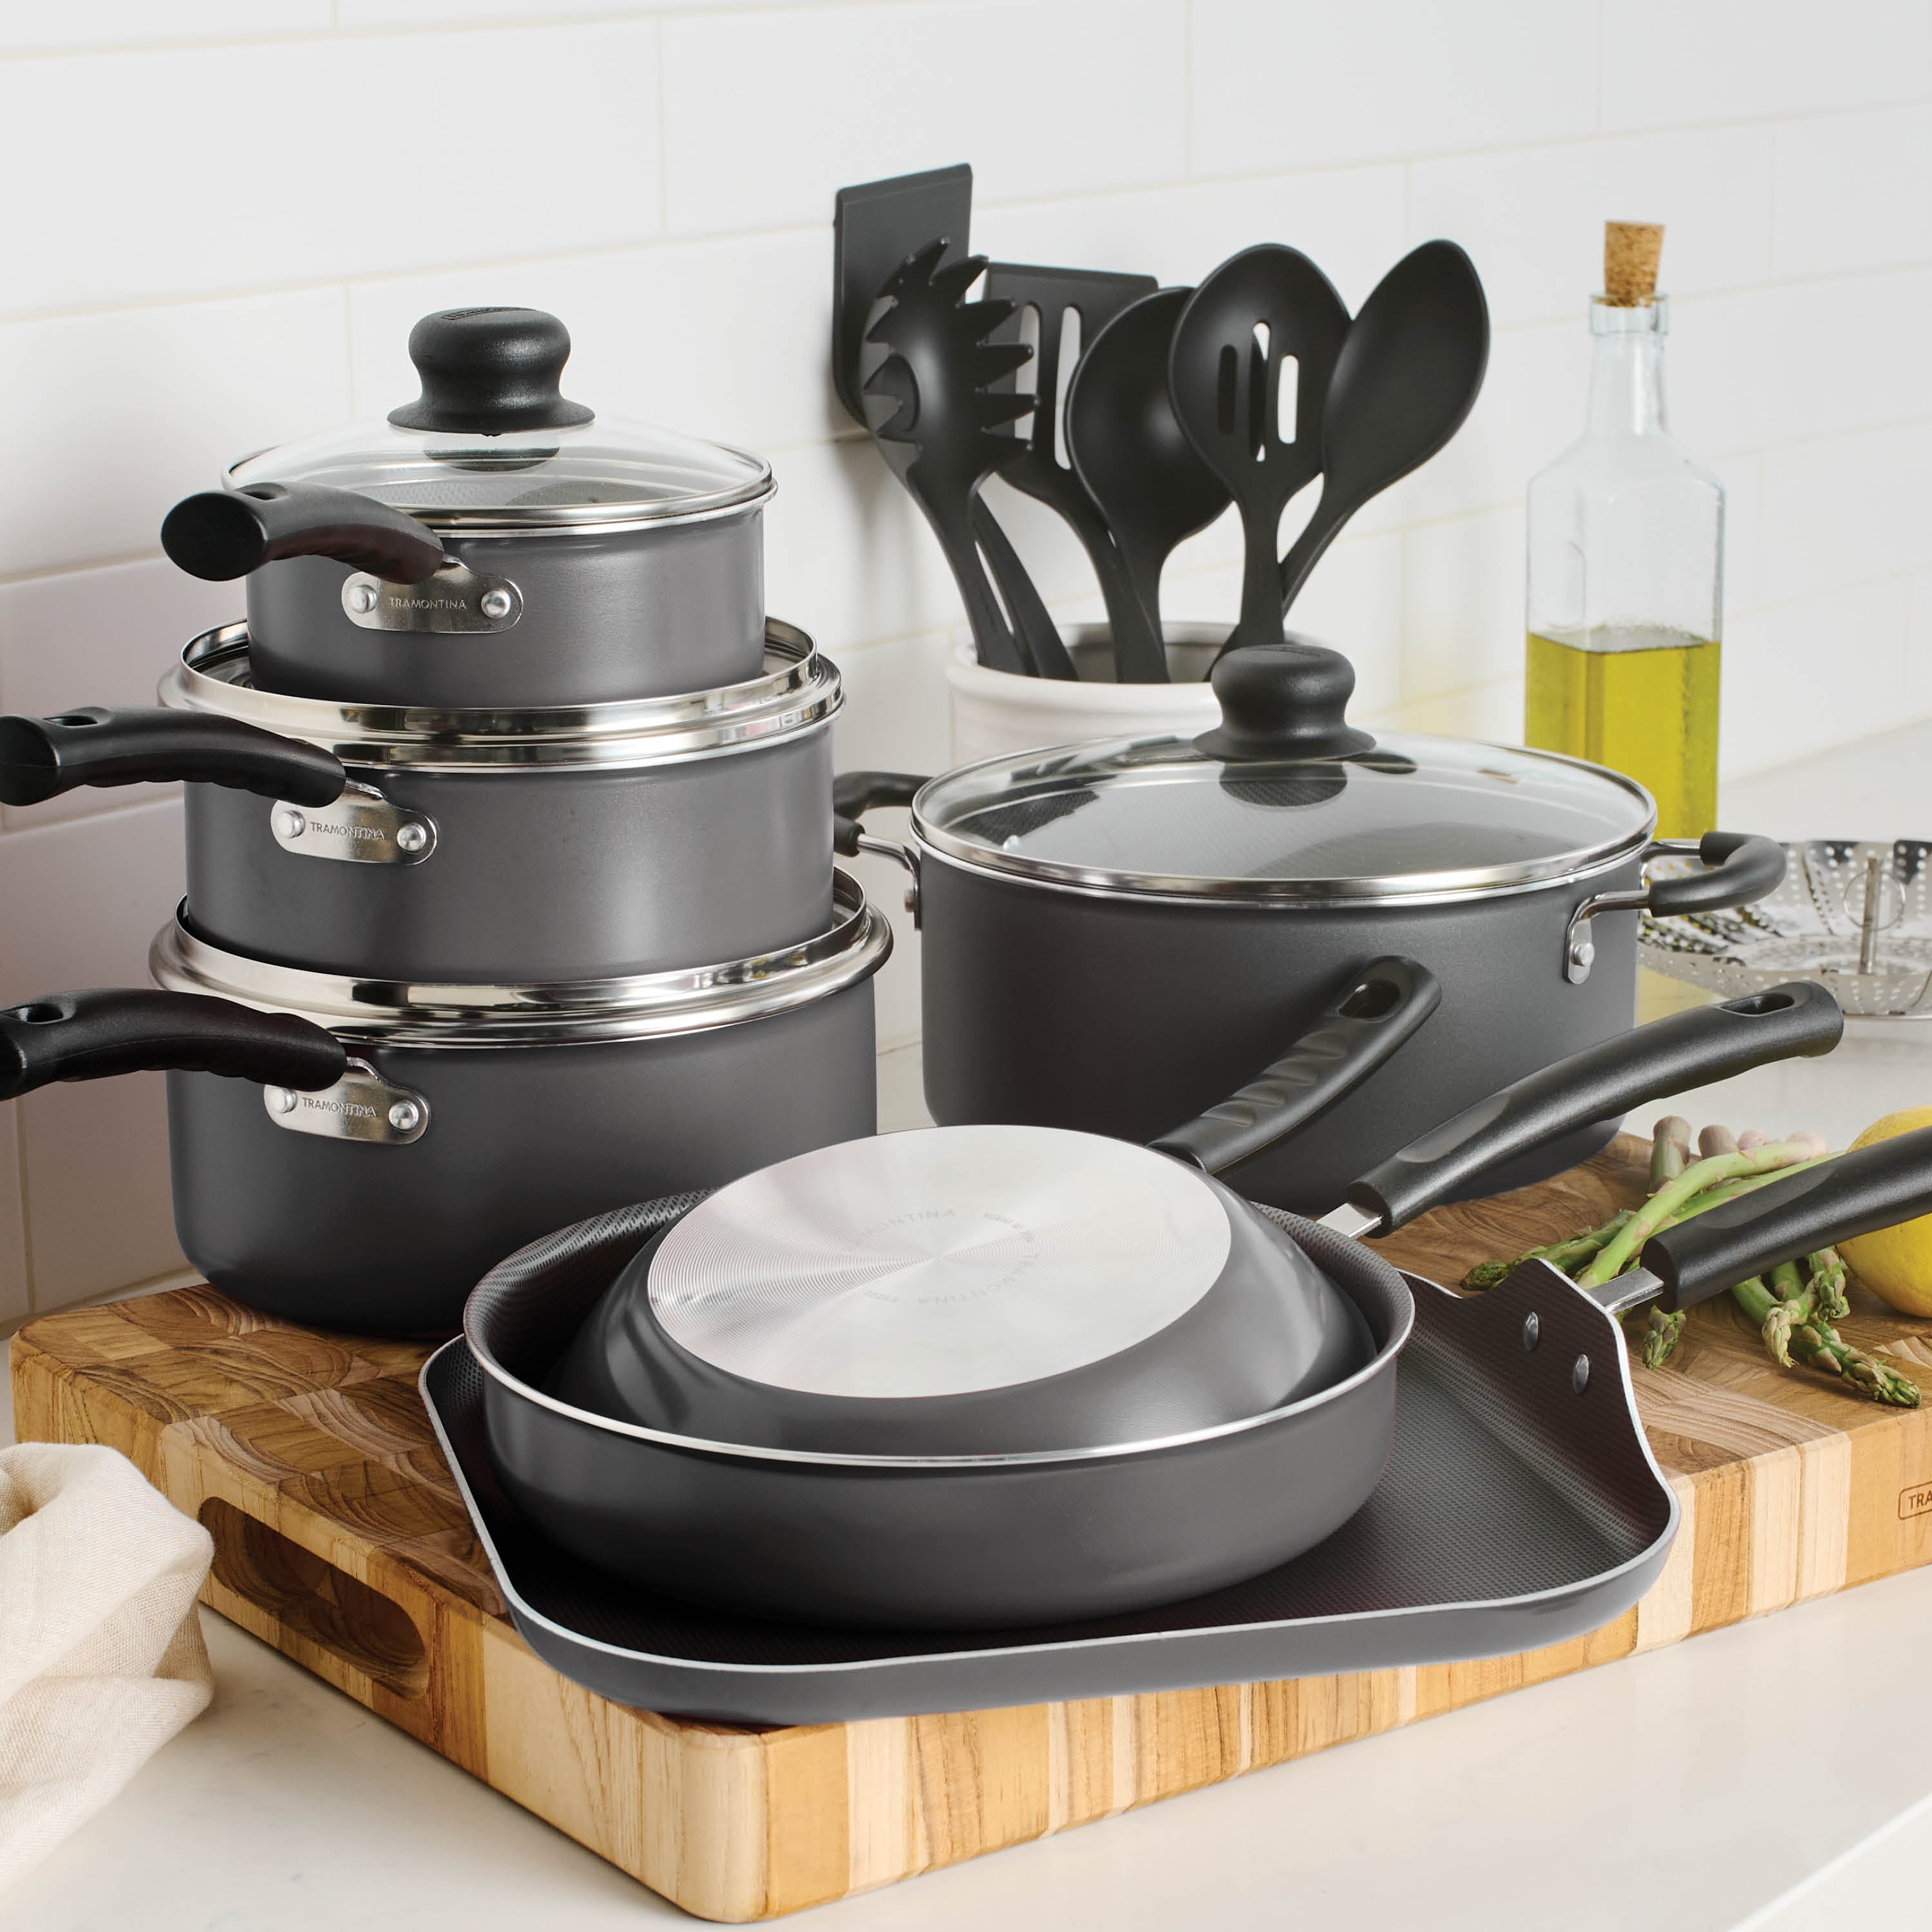 Unboxing: Tramontina 18-piece Non Stick Cookware Set, Online shopping